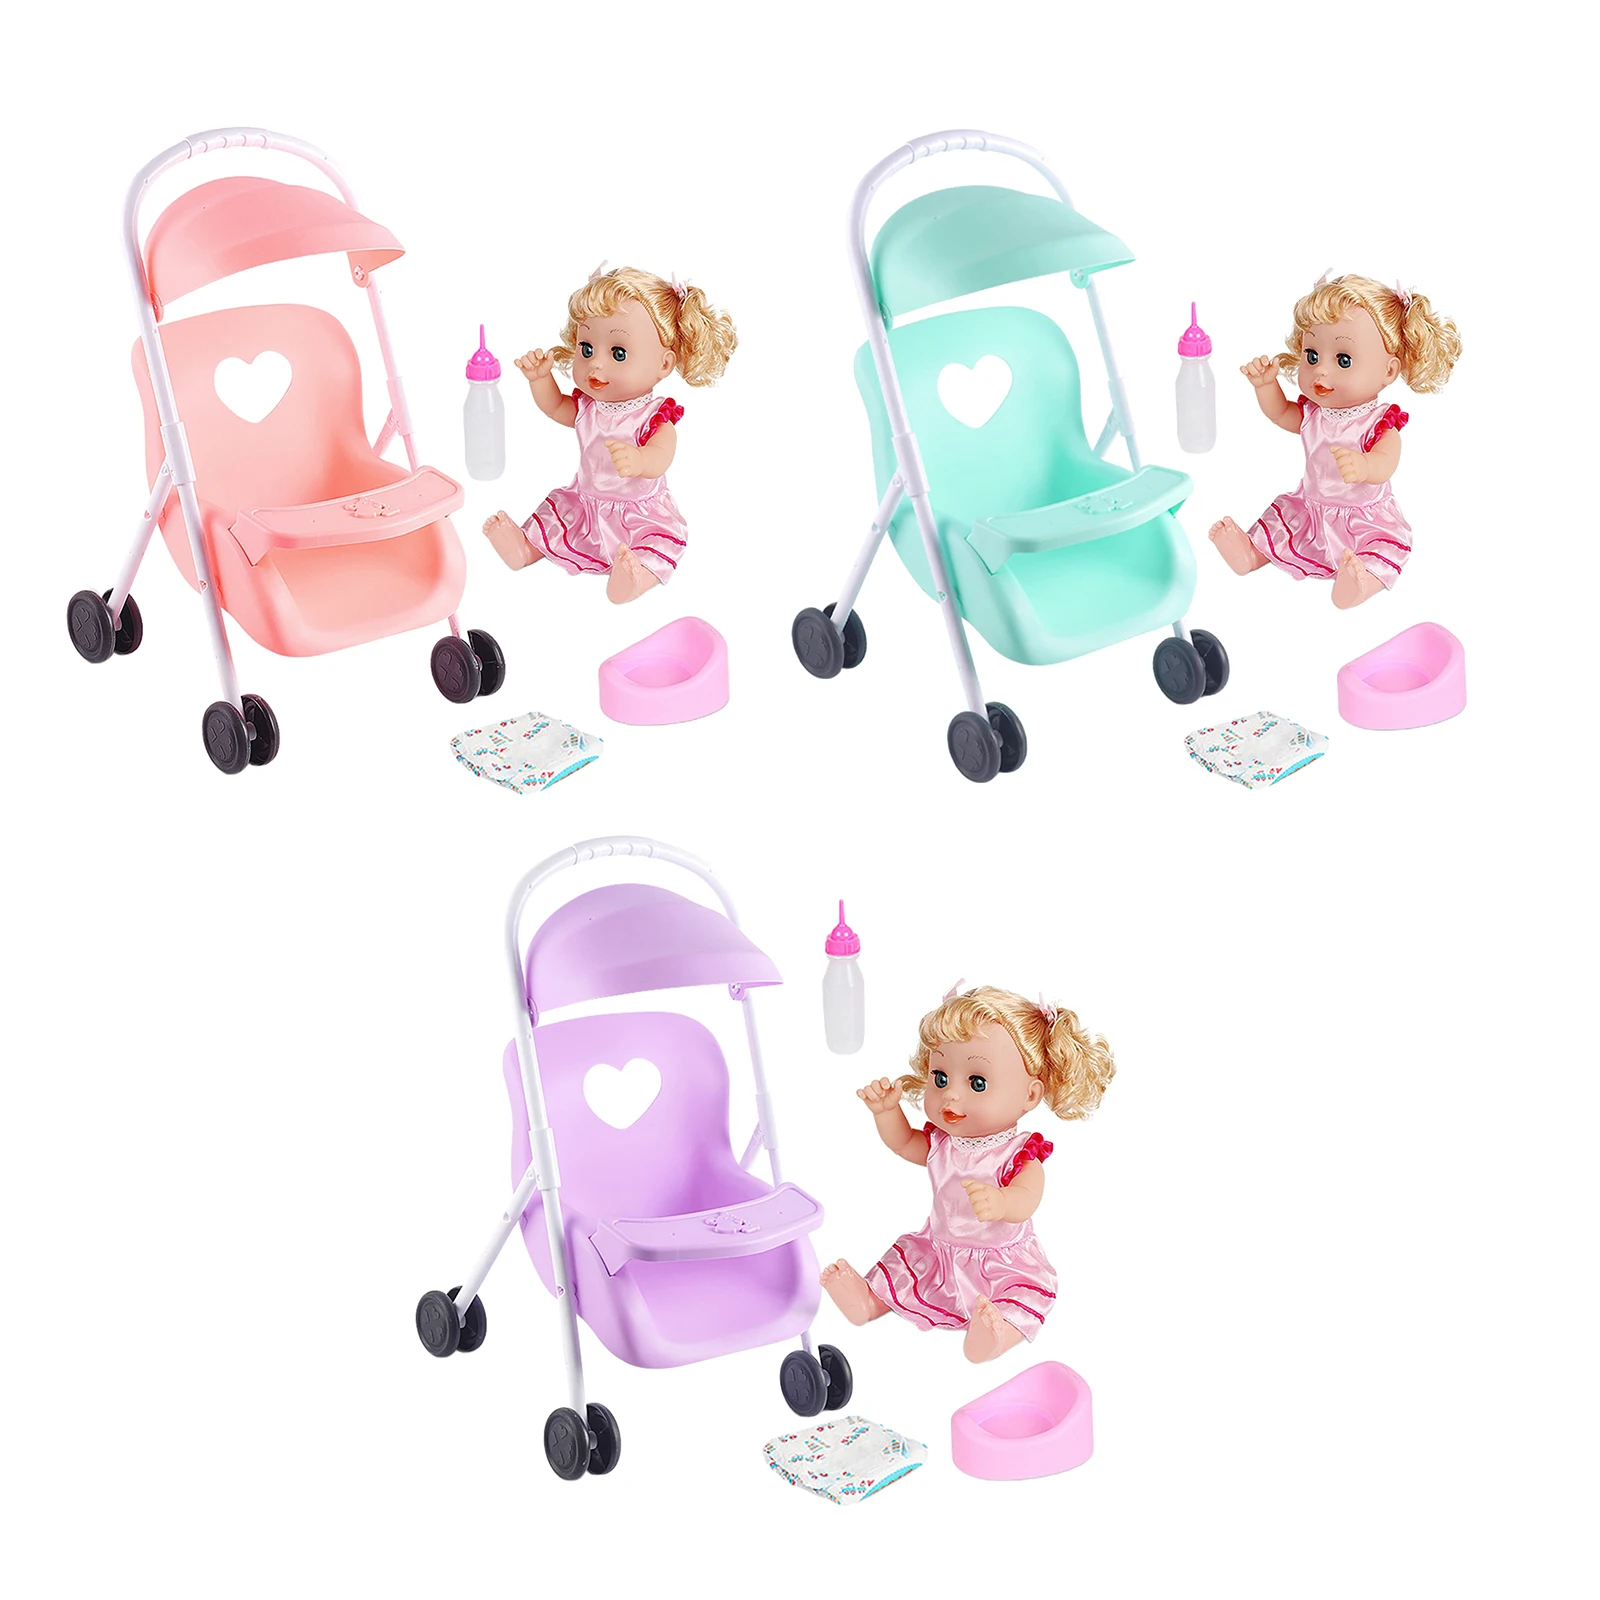 

My First Baby Doll Stroller Soft Body Baby Doll Included Fun Play Combo Set for Babies Infants Toddlers Girls Kids